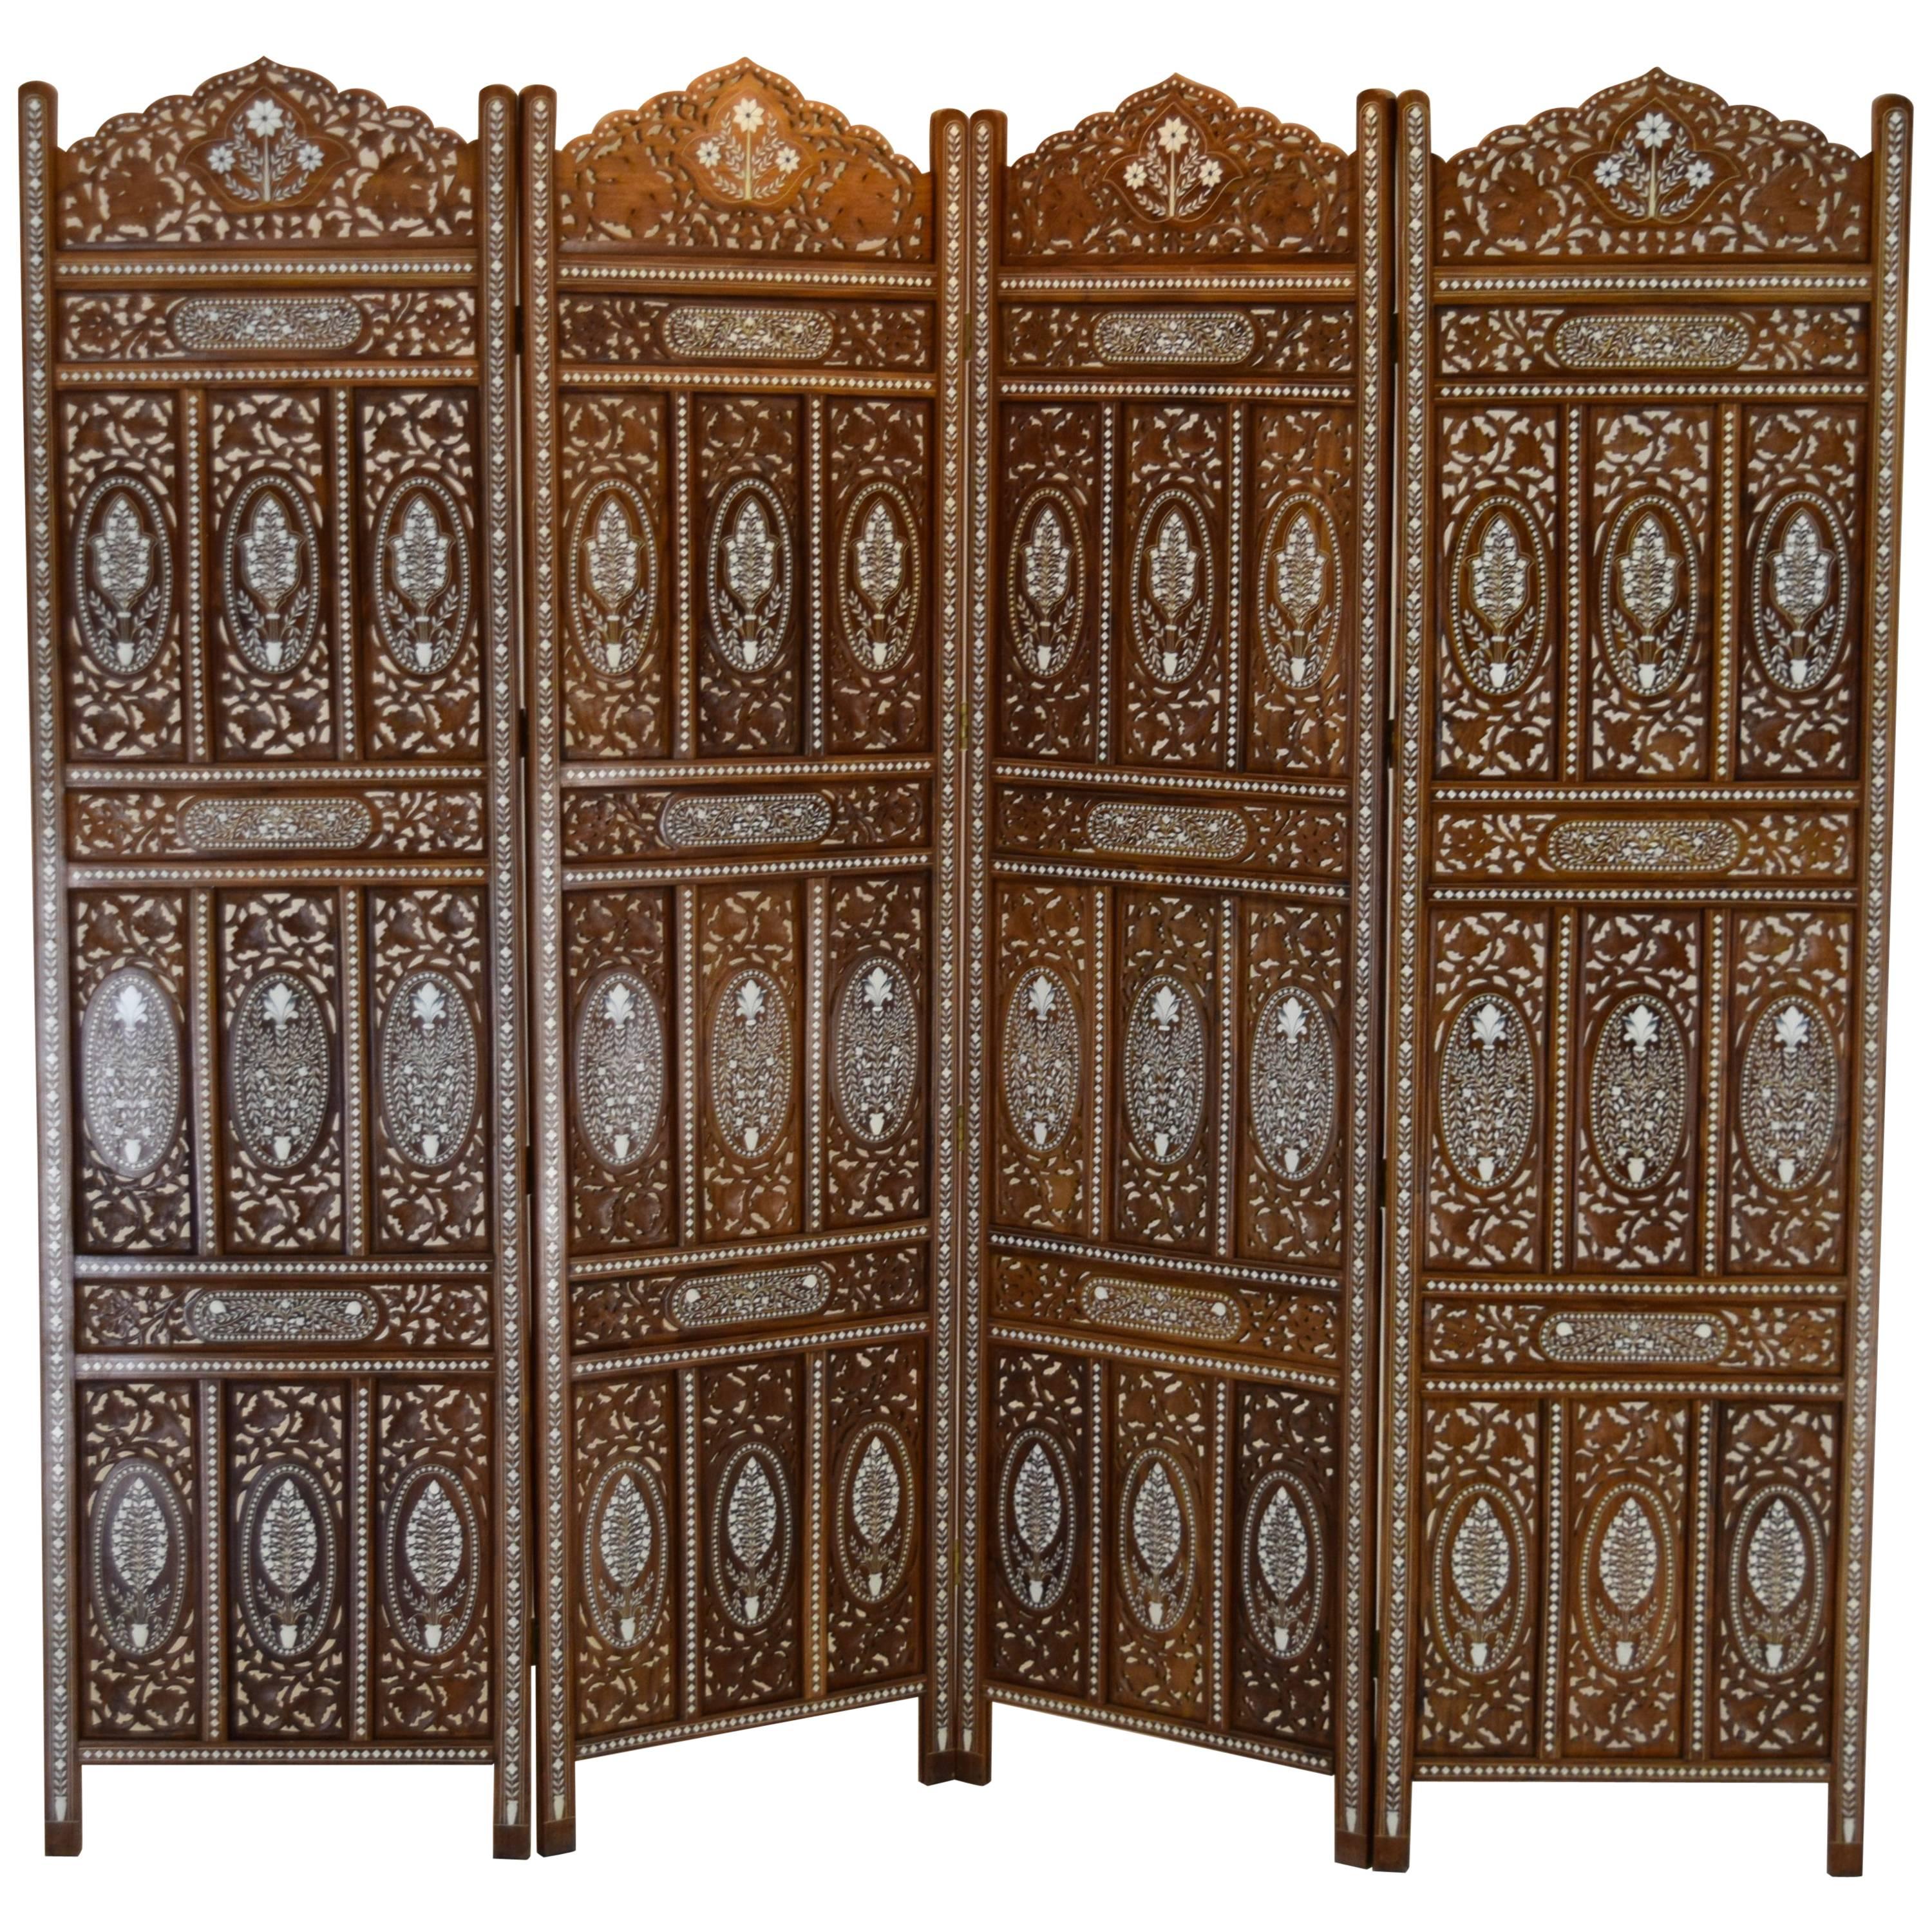 Extraordinary Double Motif Anglo-Indian Privacy Folding Screen in Teak and Bone 